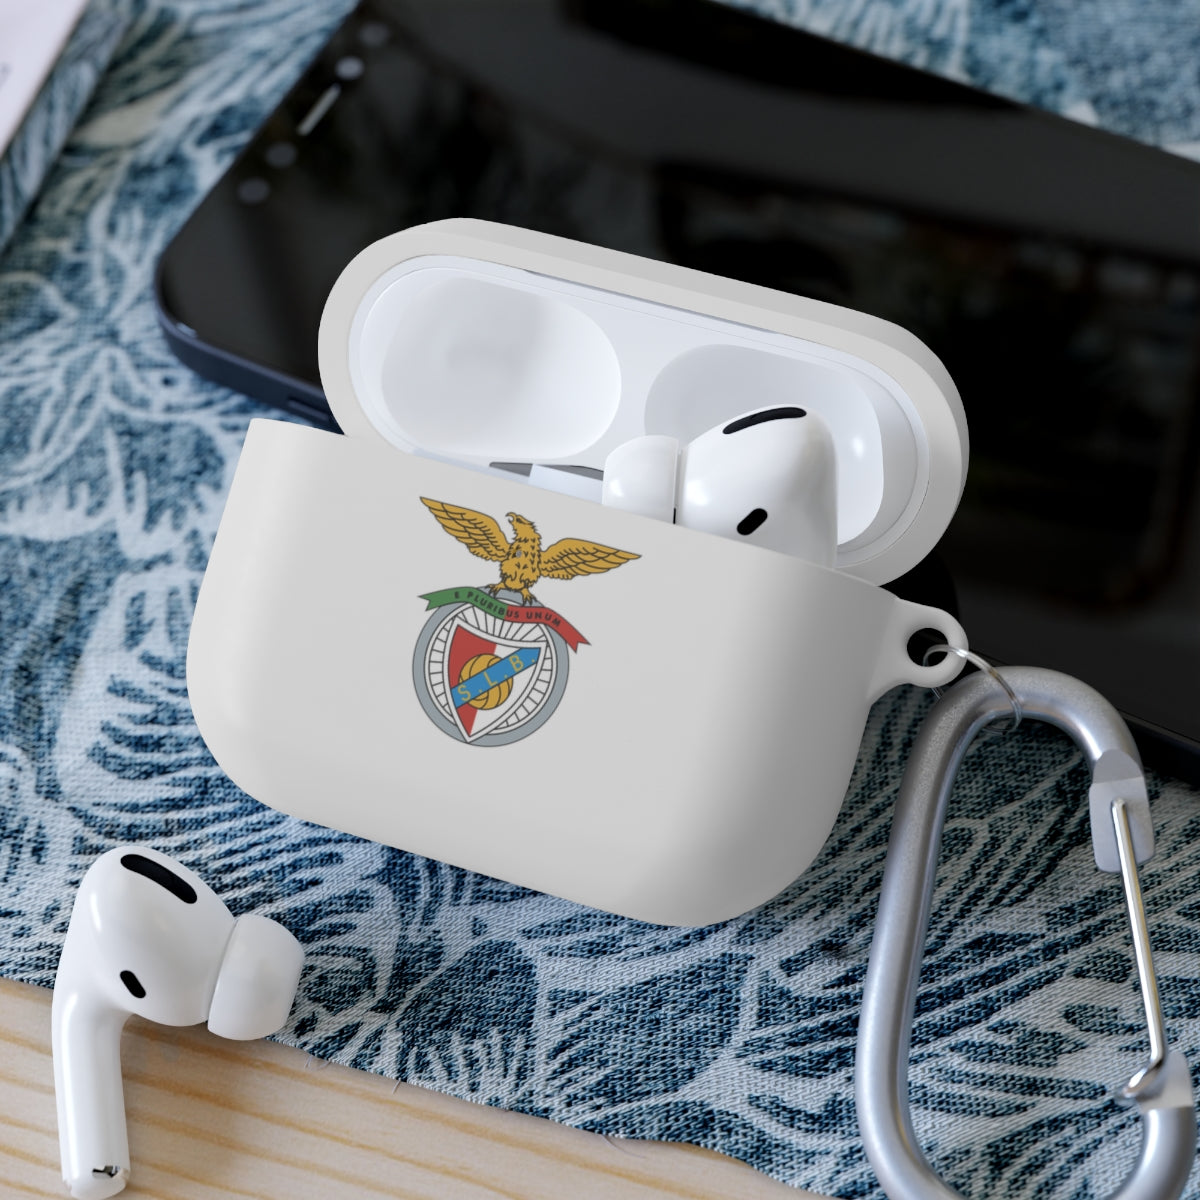 Benfica AirPods and AirPods Pro Case Cover